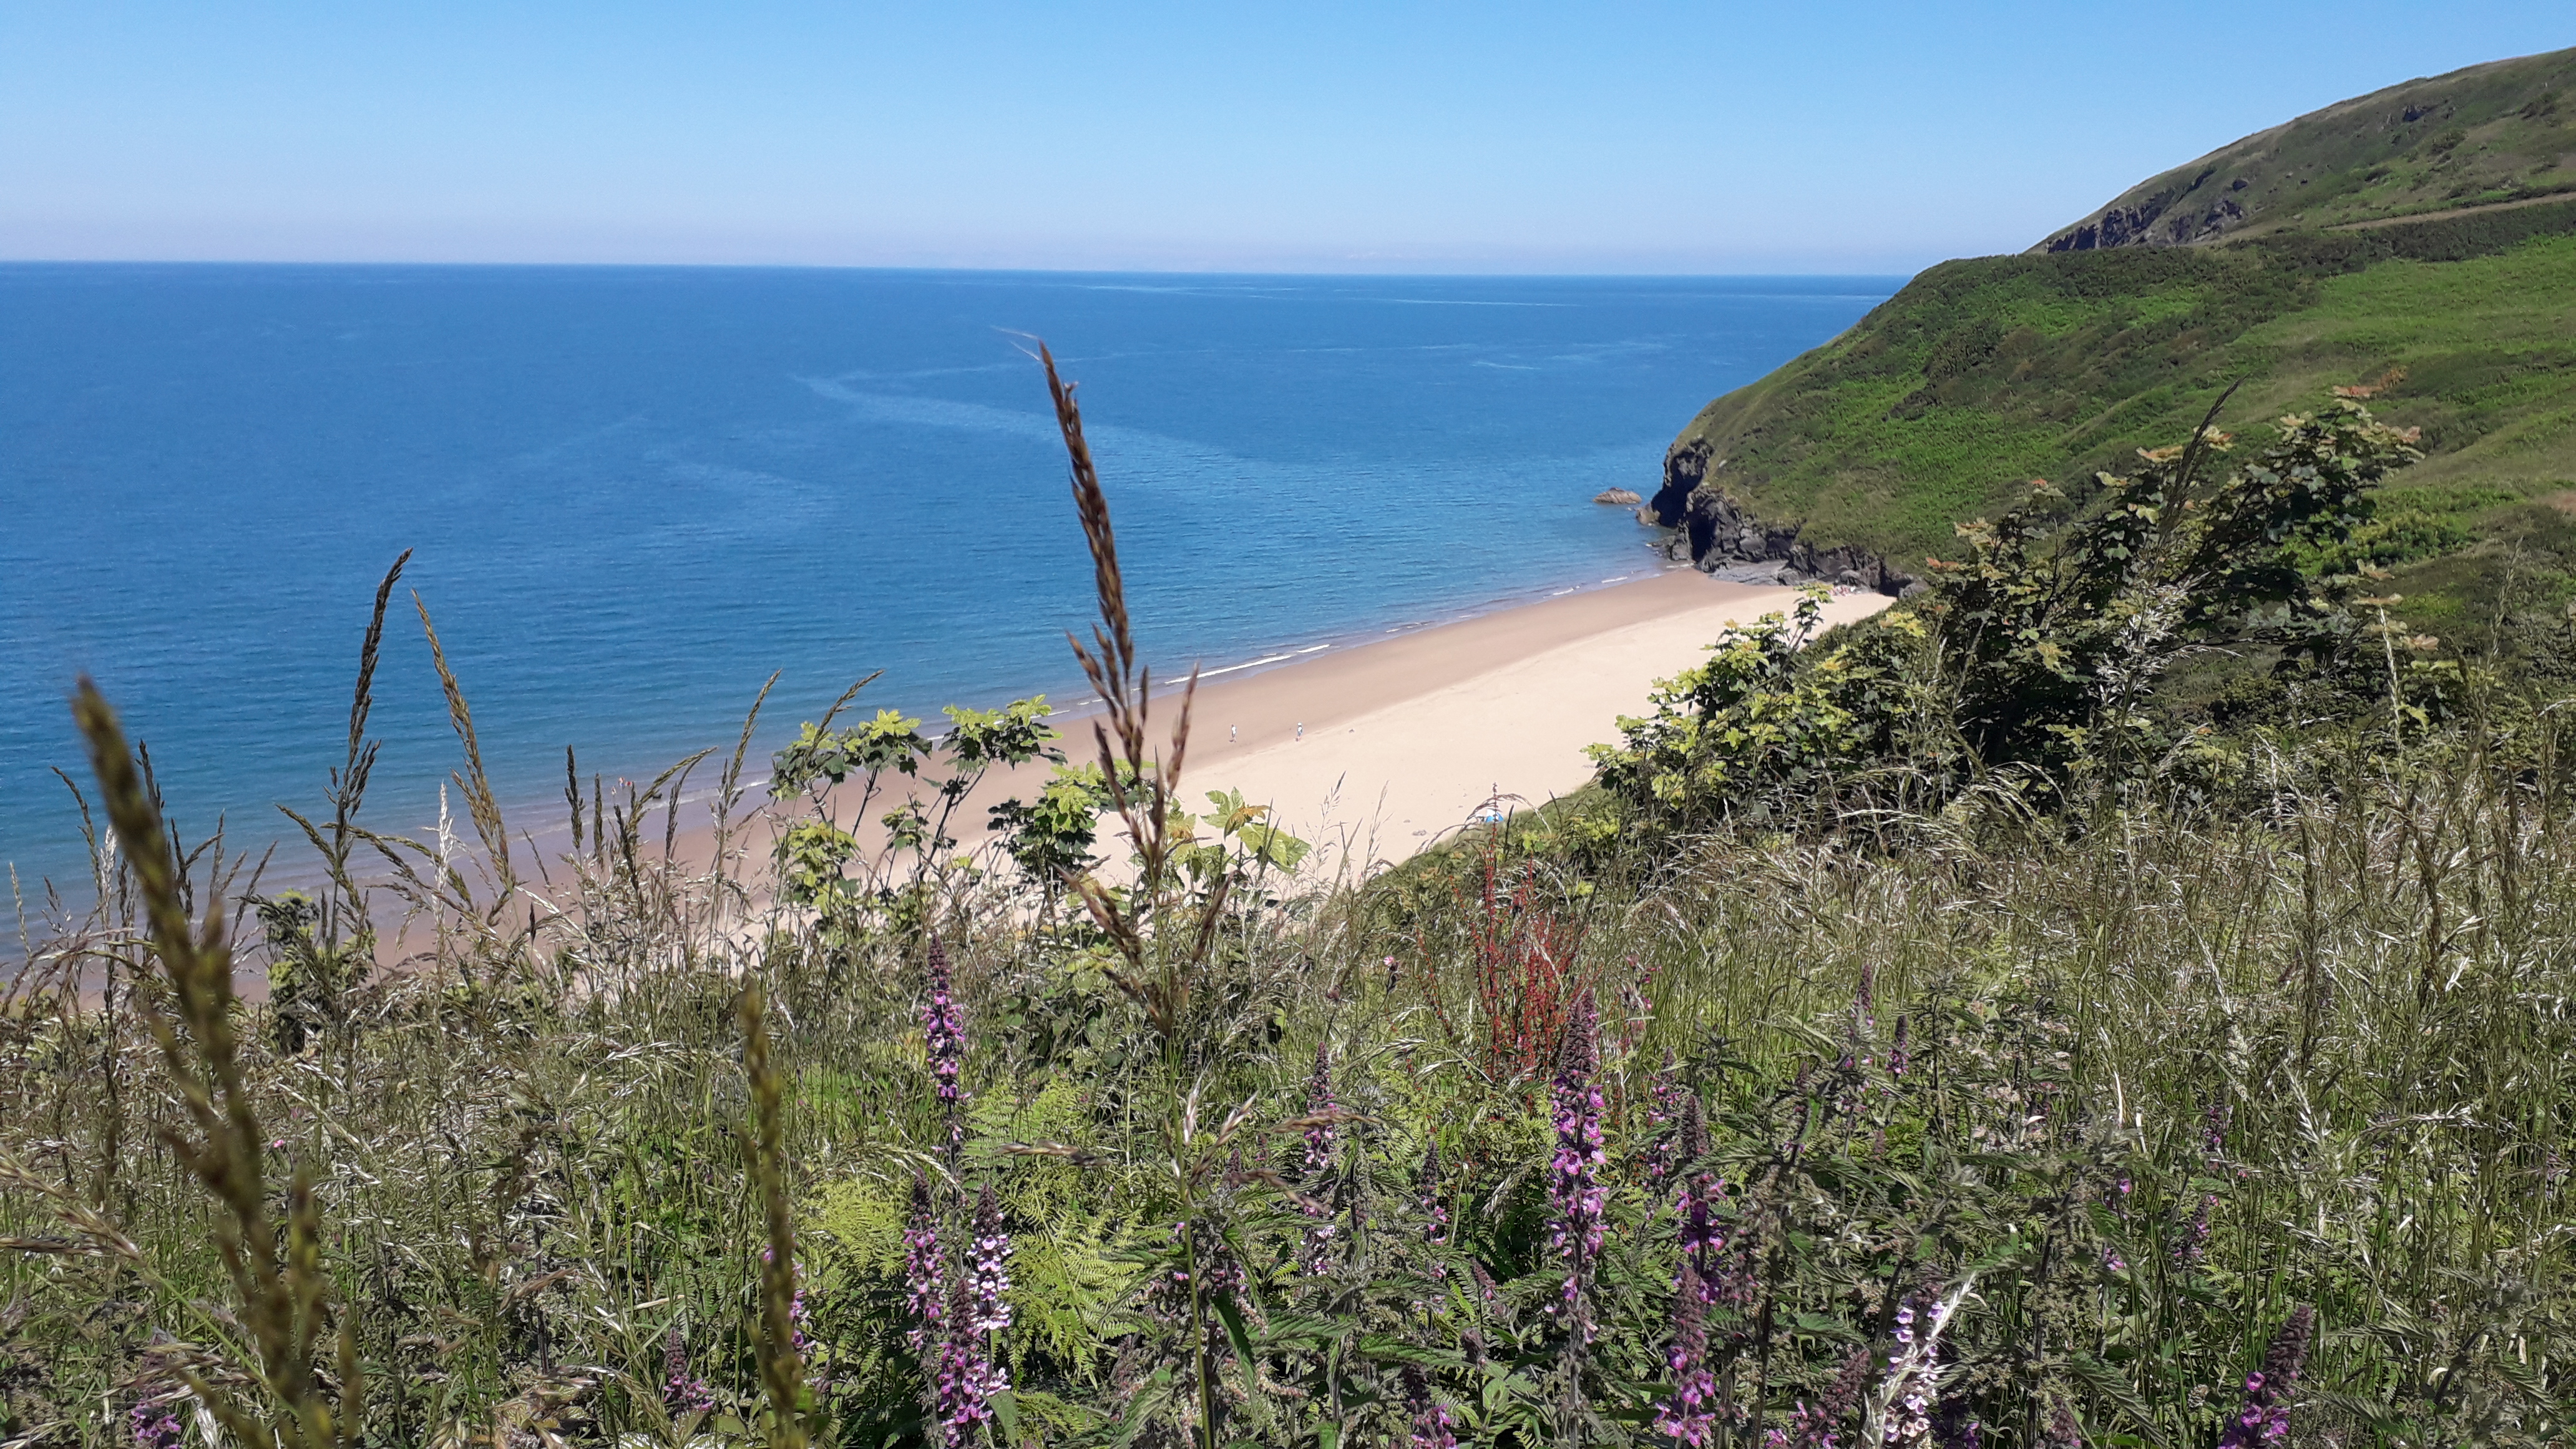 Looking back at Penbryn Beach from the Coastal Path